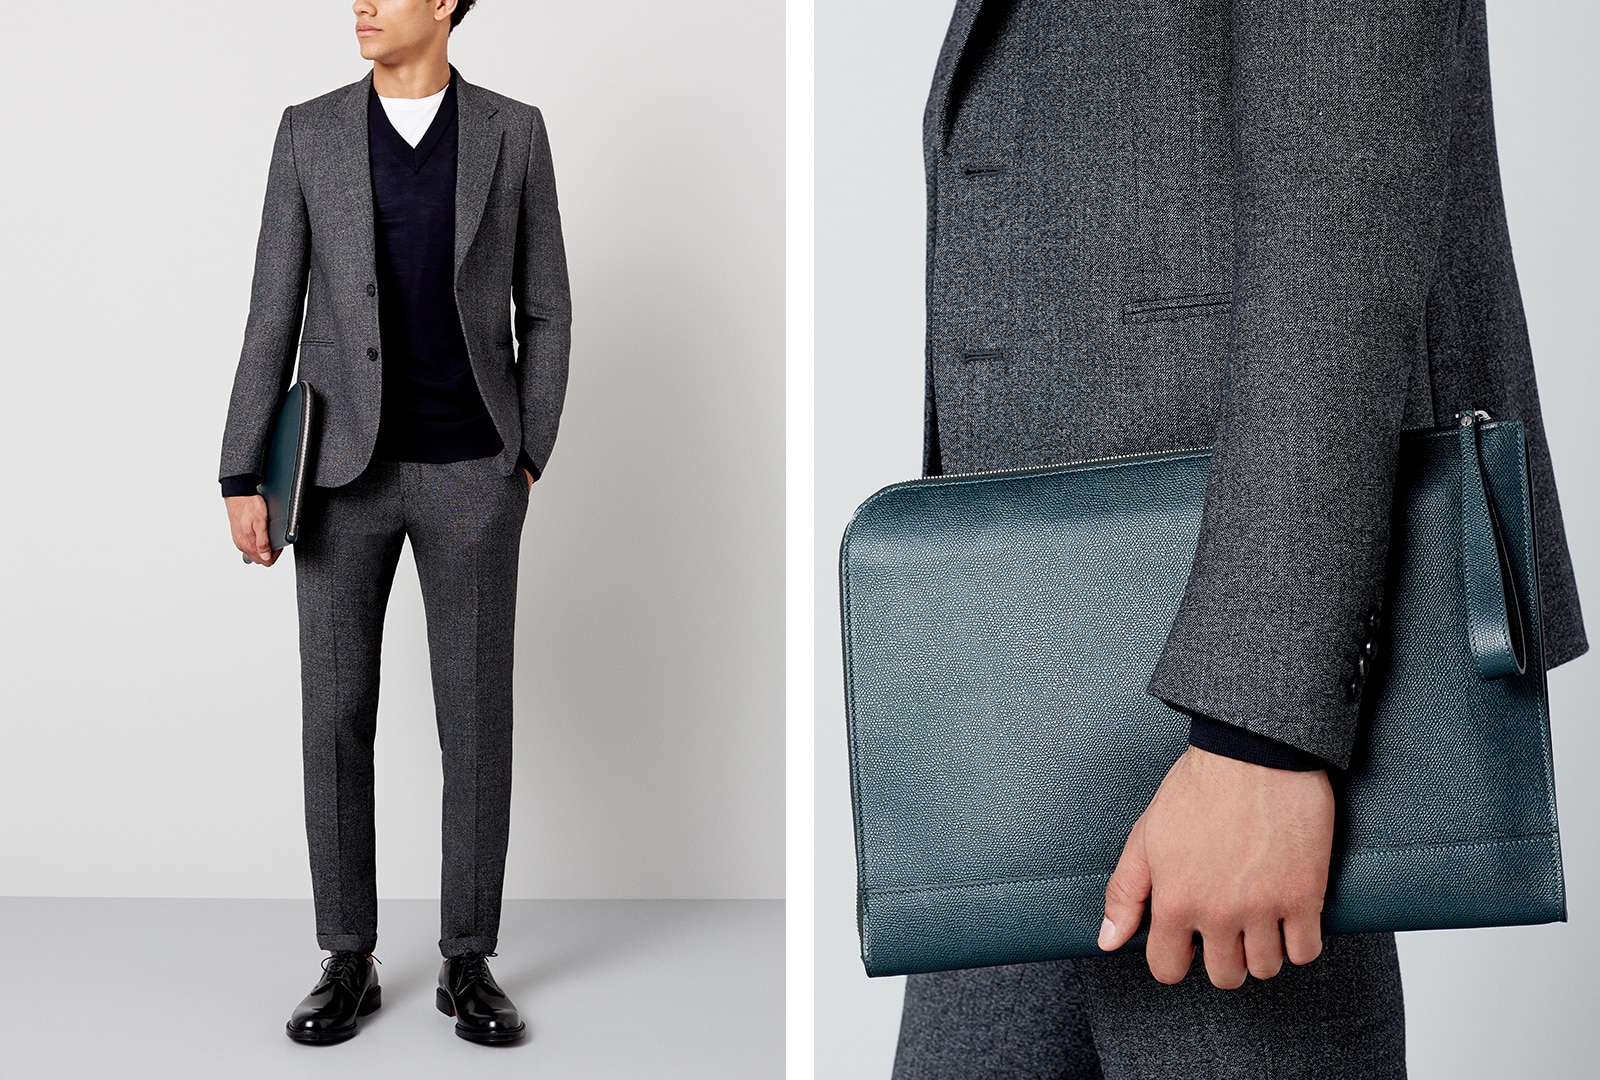 How To Nail Smart-Casual | The Journal | MR PORTER